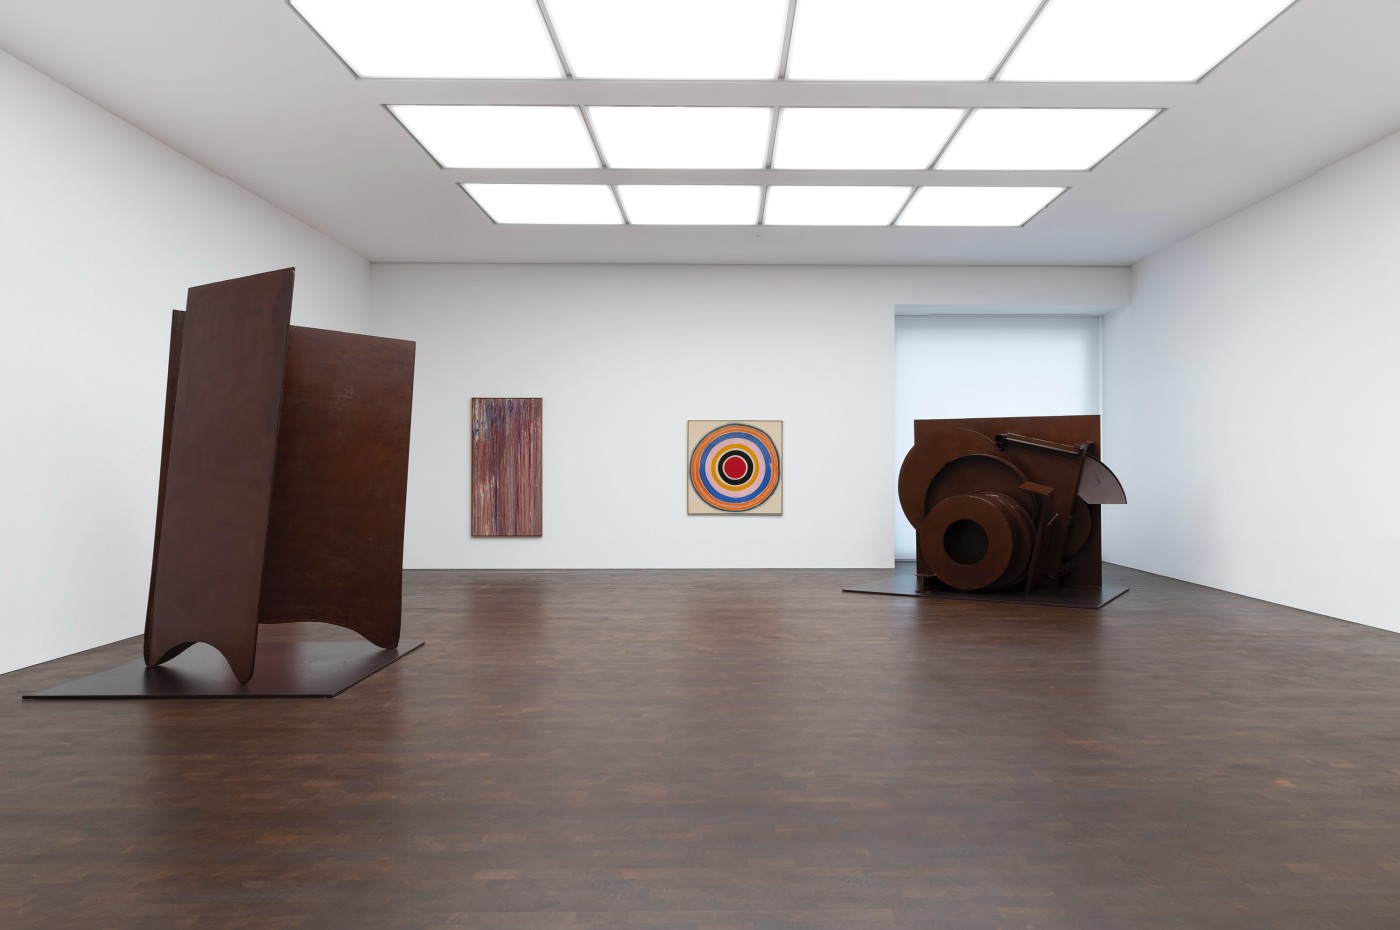 Installation image for Caro and North American Painters, at Gagosian